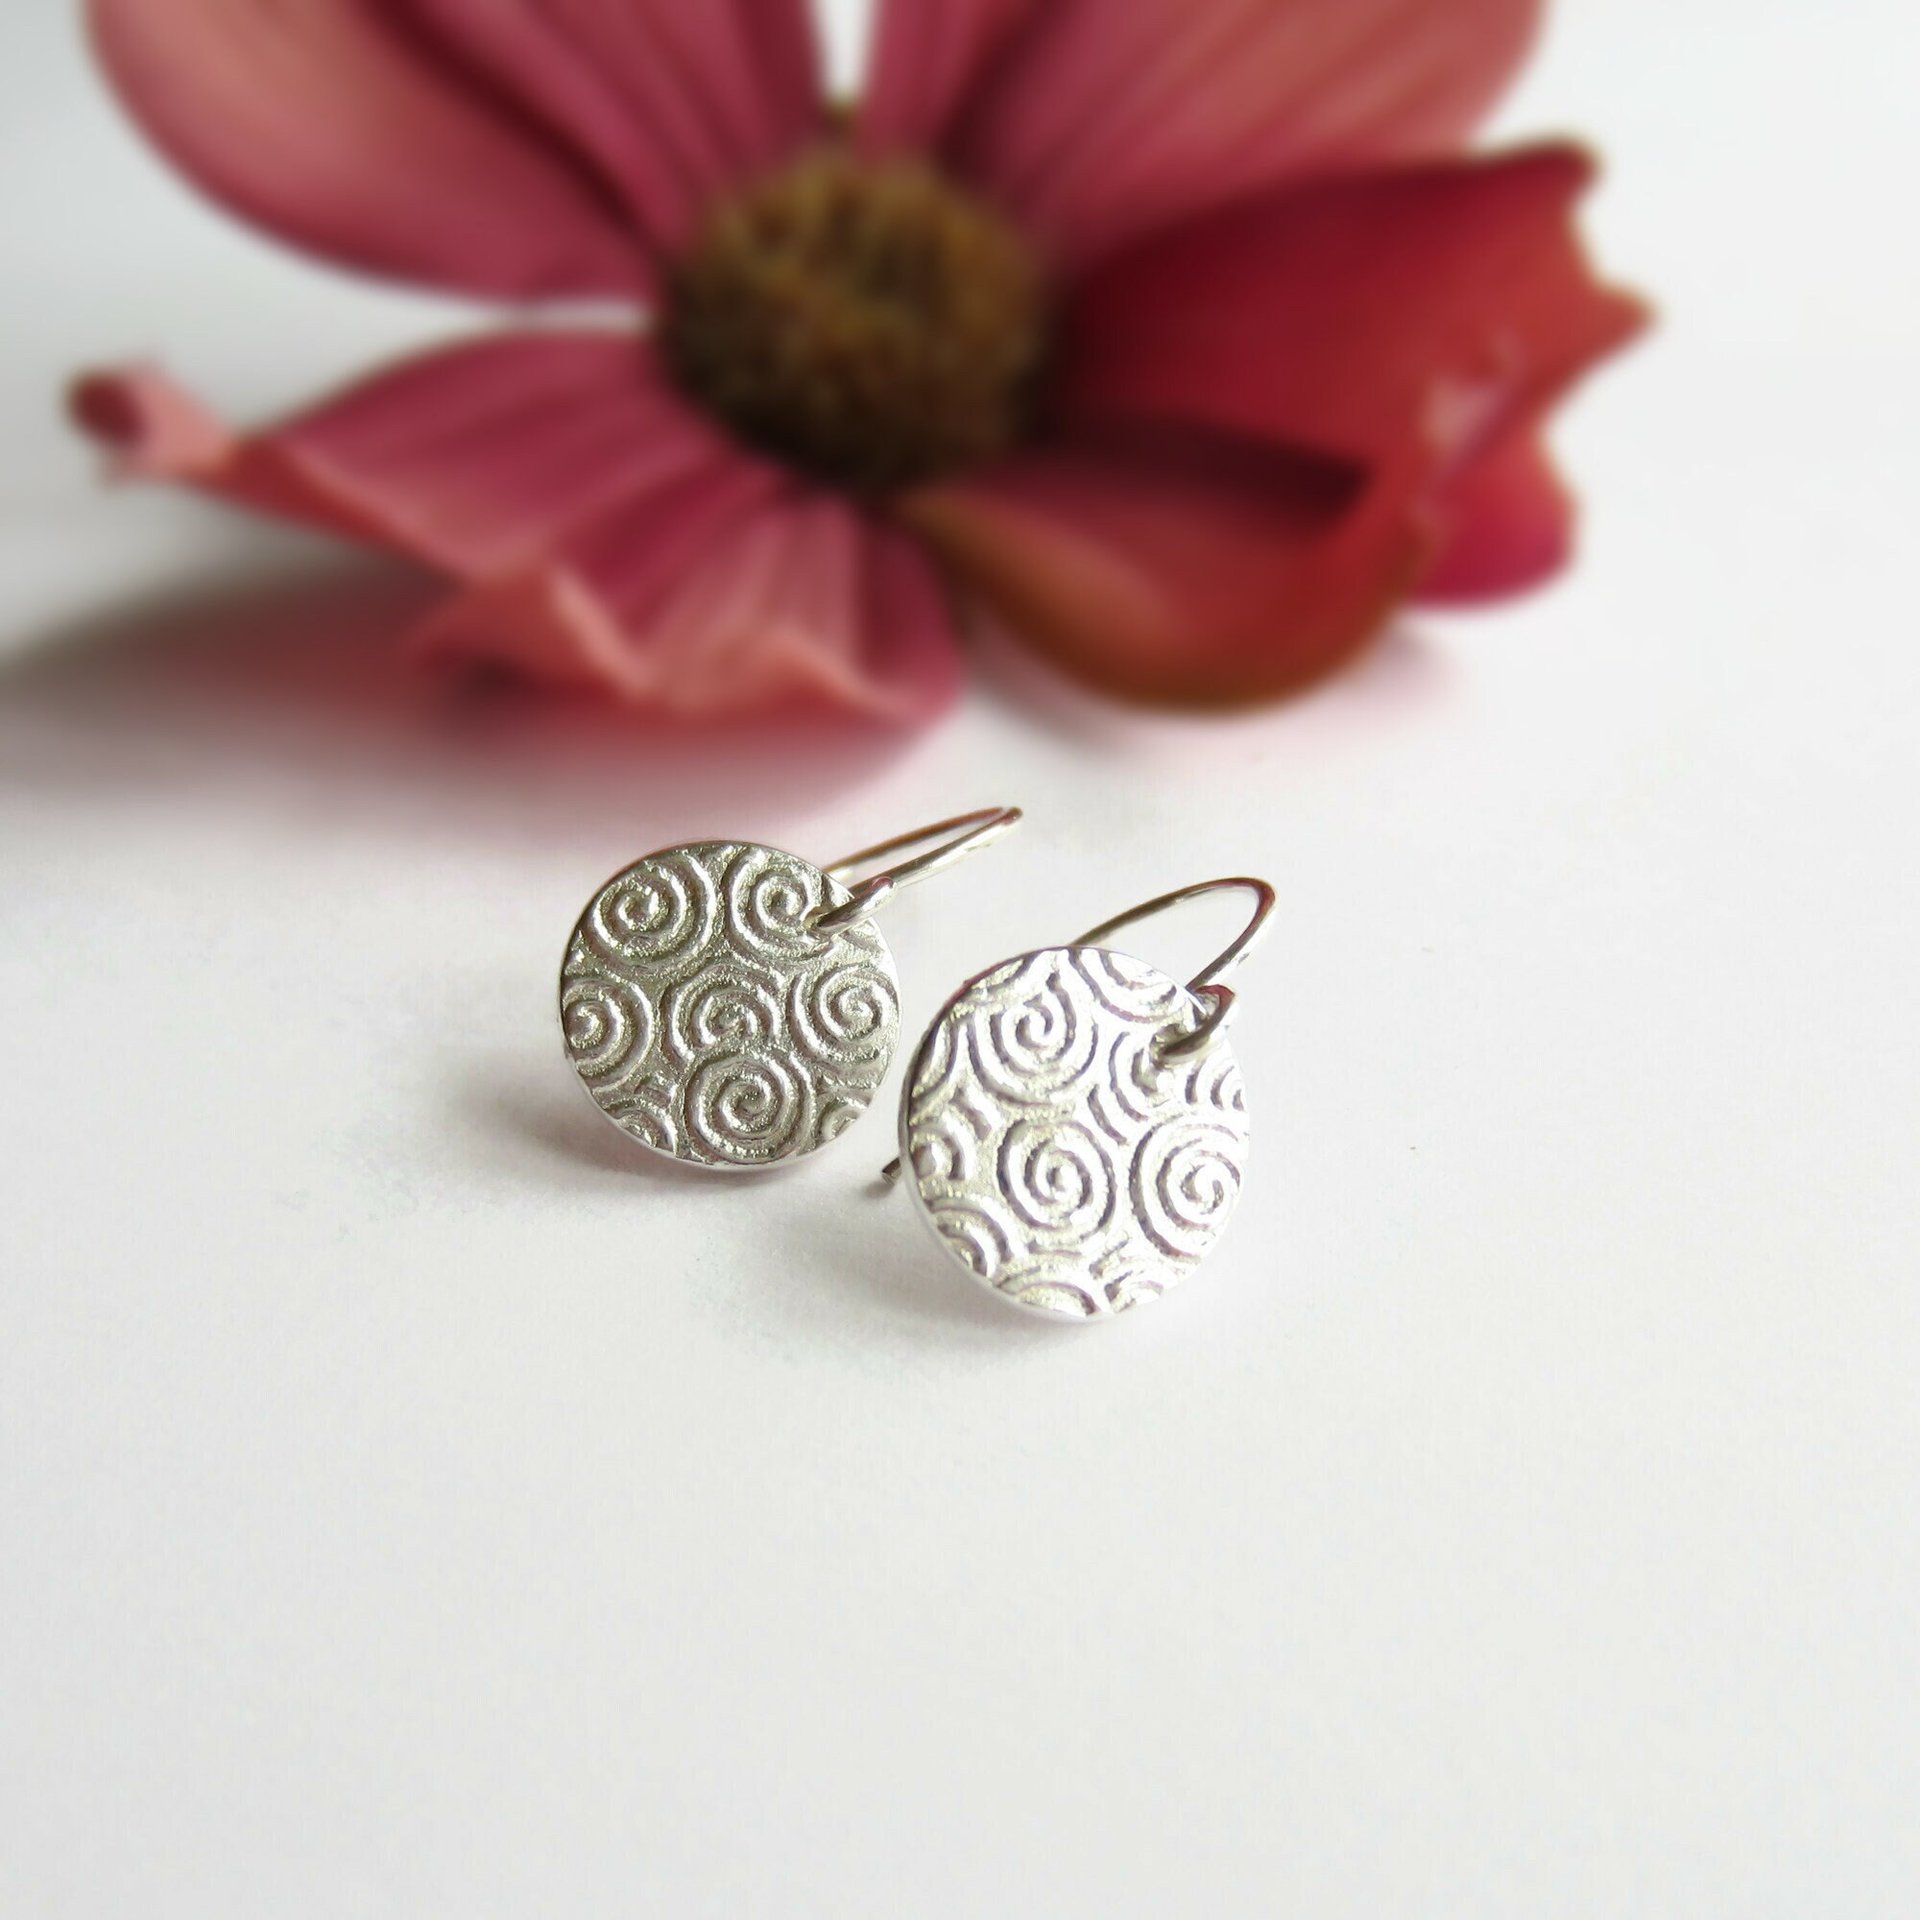 Spiral Patterned Disc Drop Earrings ~ Fine Silver and Sterling Silver ~ Handmade by The Tiny Tree Frog Jewellery